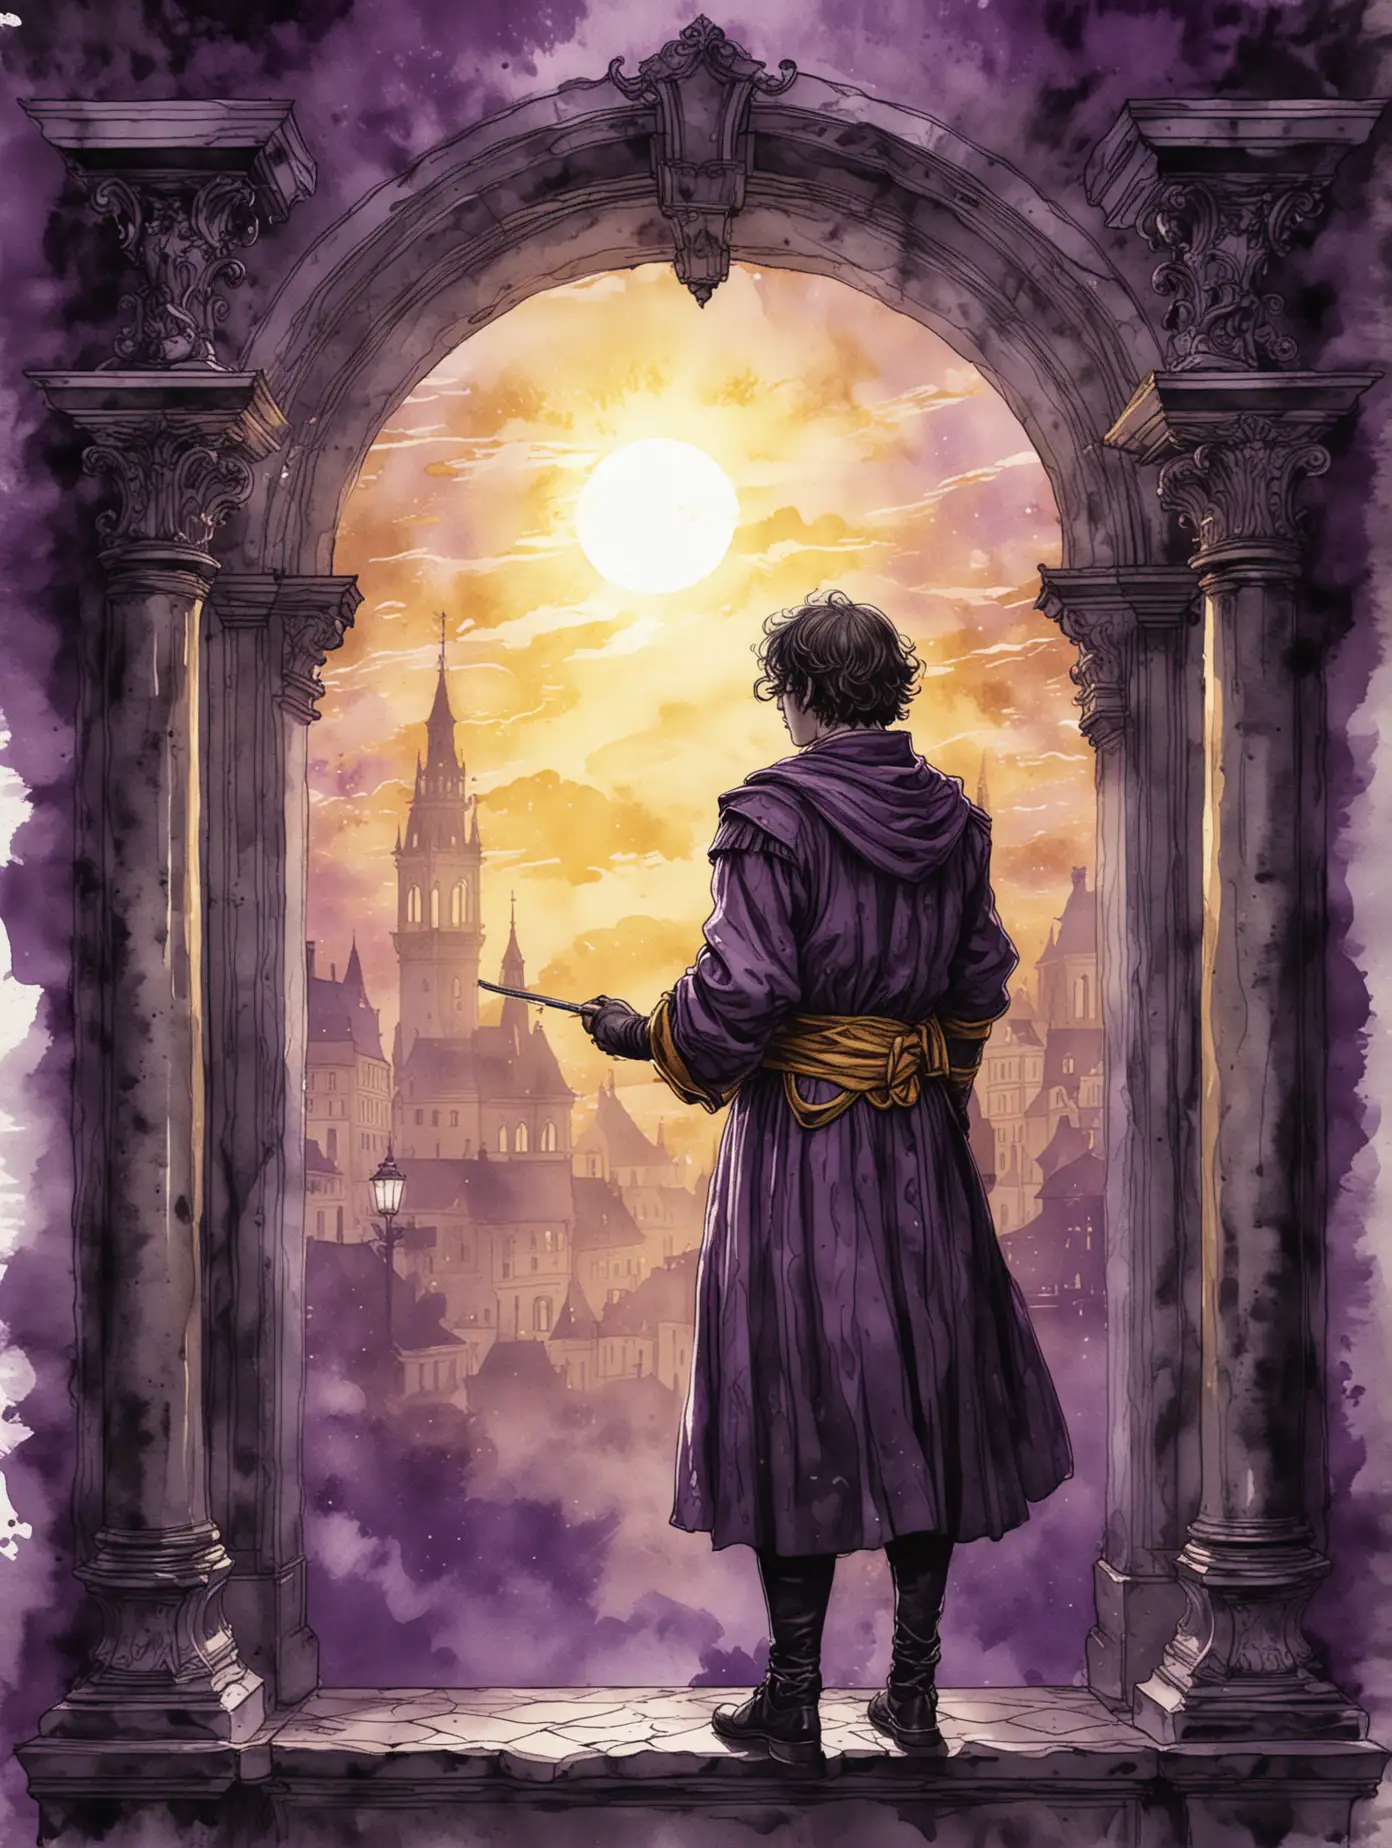 Digital illustration, boarder, dark academia, 300dpi,  black and purple watercolour and ink wash,  a bright golden light in the background.